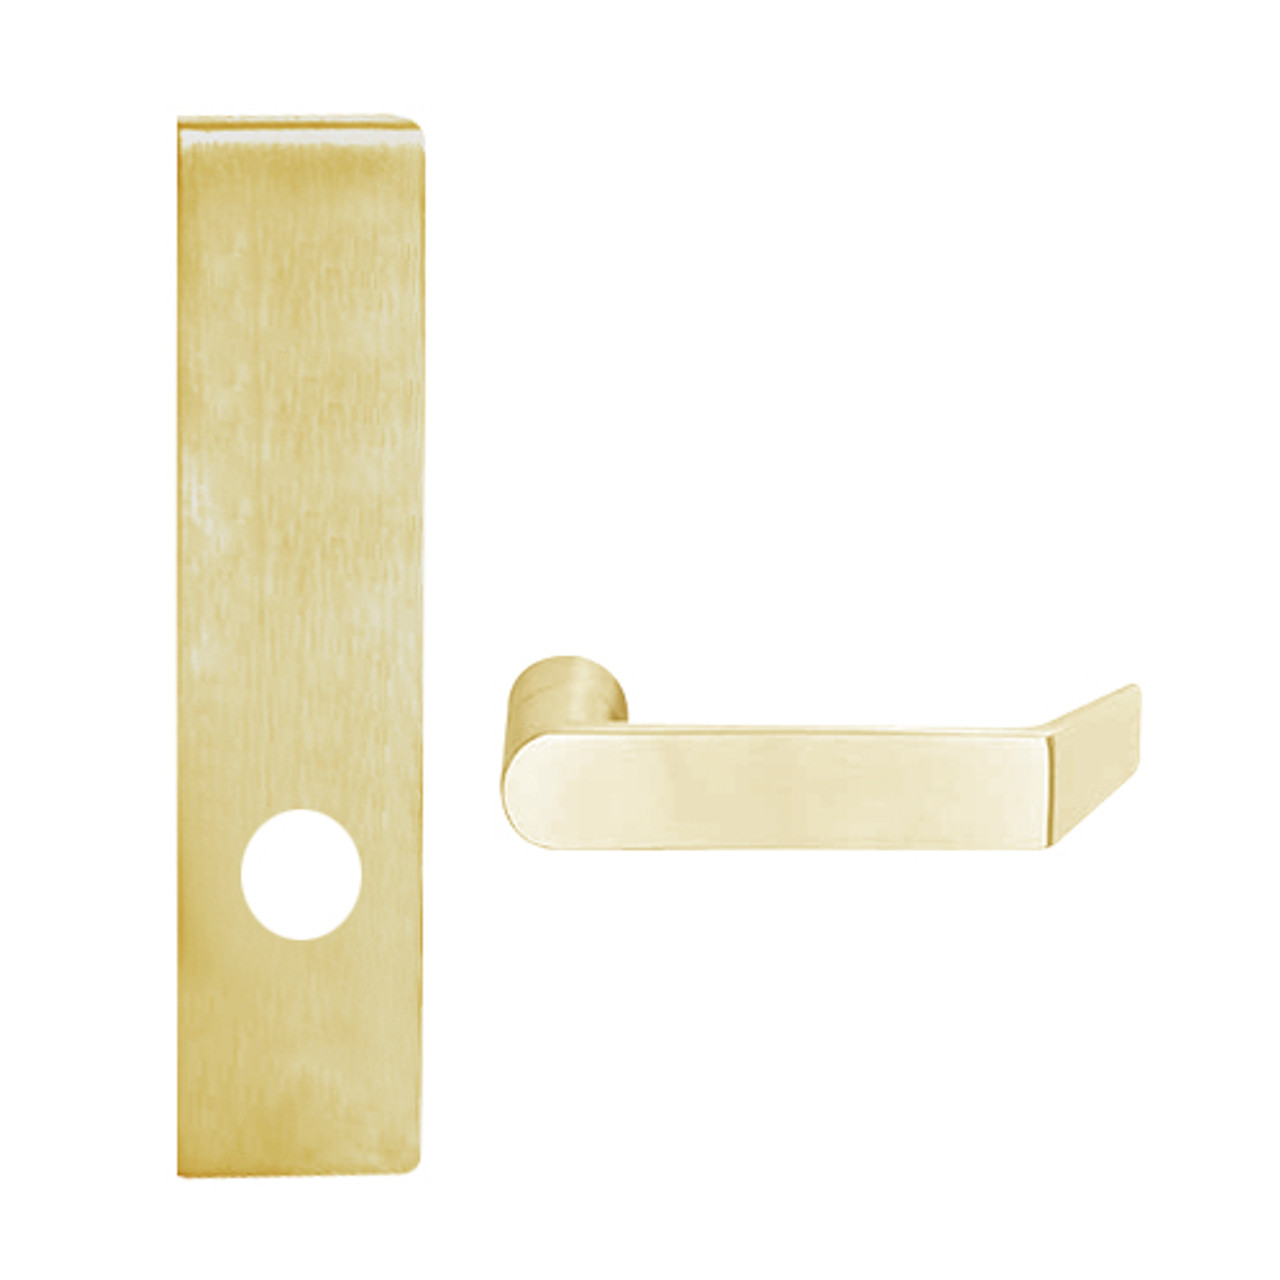 L9025-06L-606 Schlage L Series Exit Commercial Mortise Lock with 06 Cast Lever Design in Satin Brass